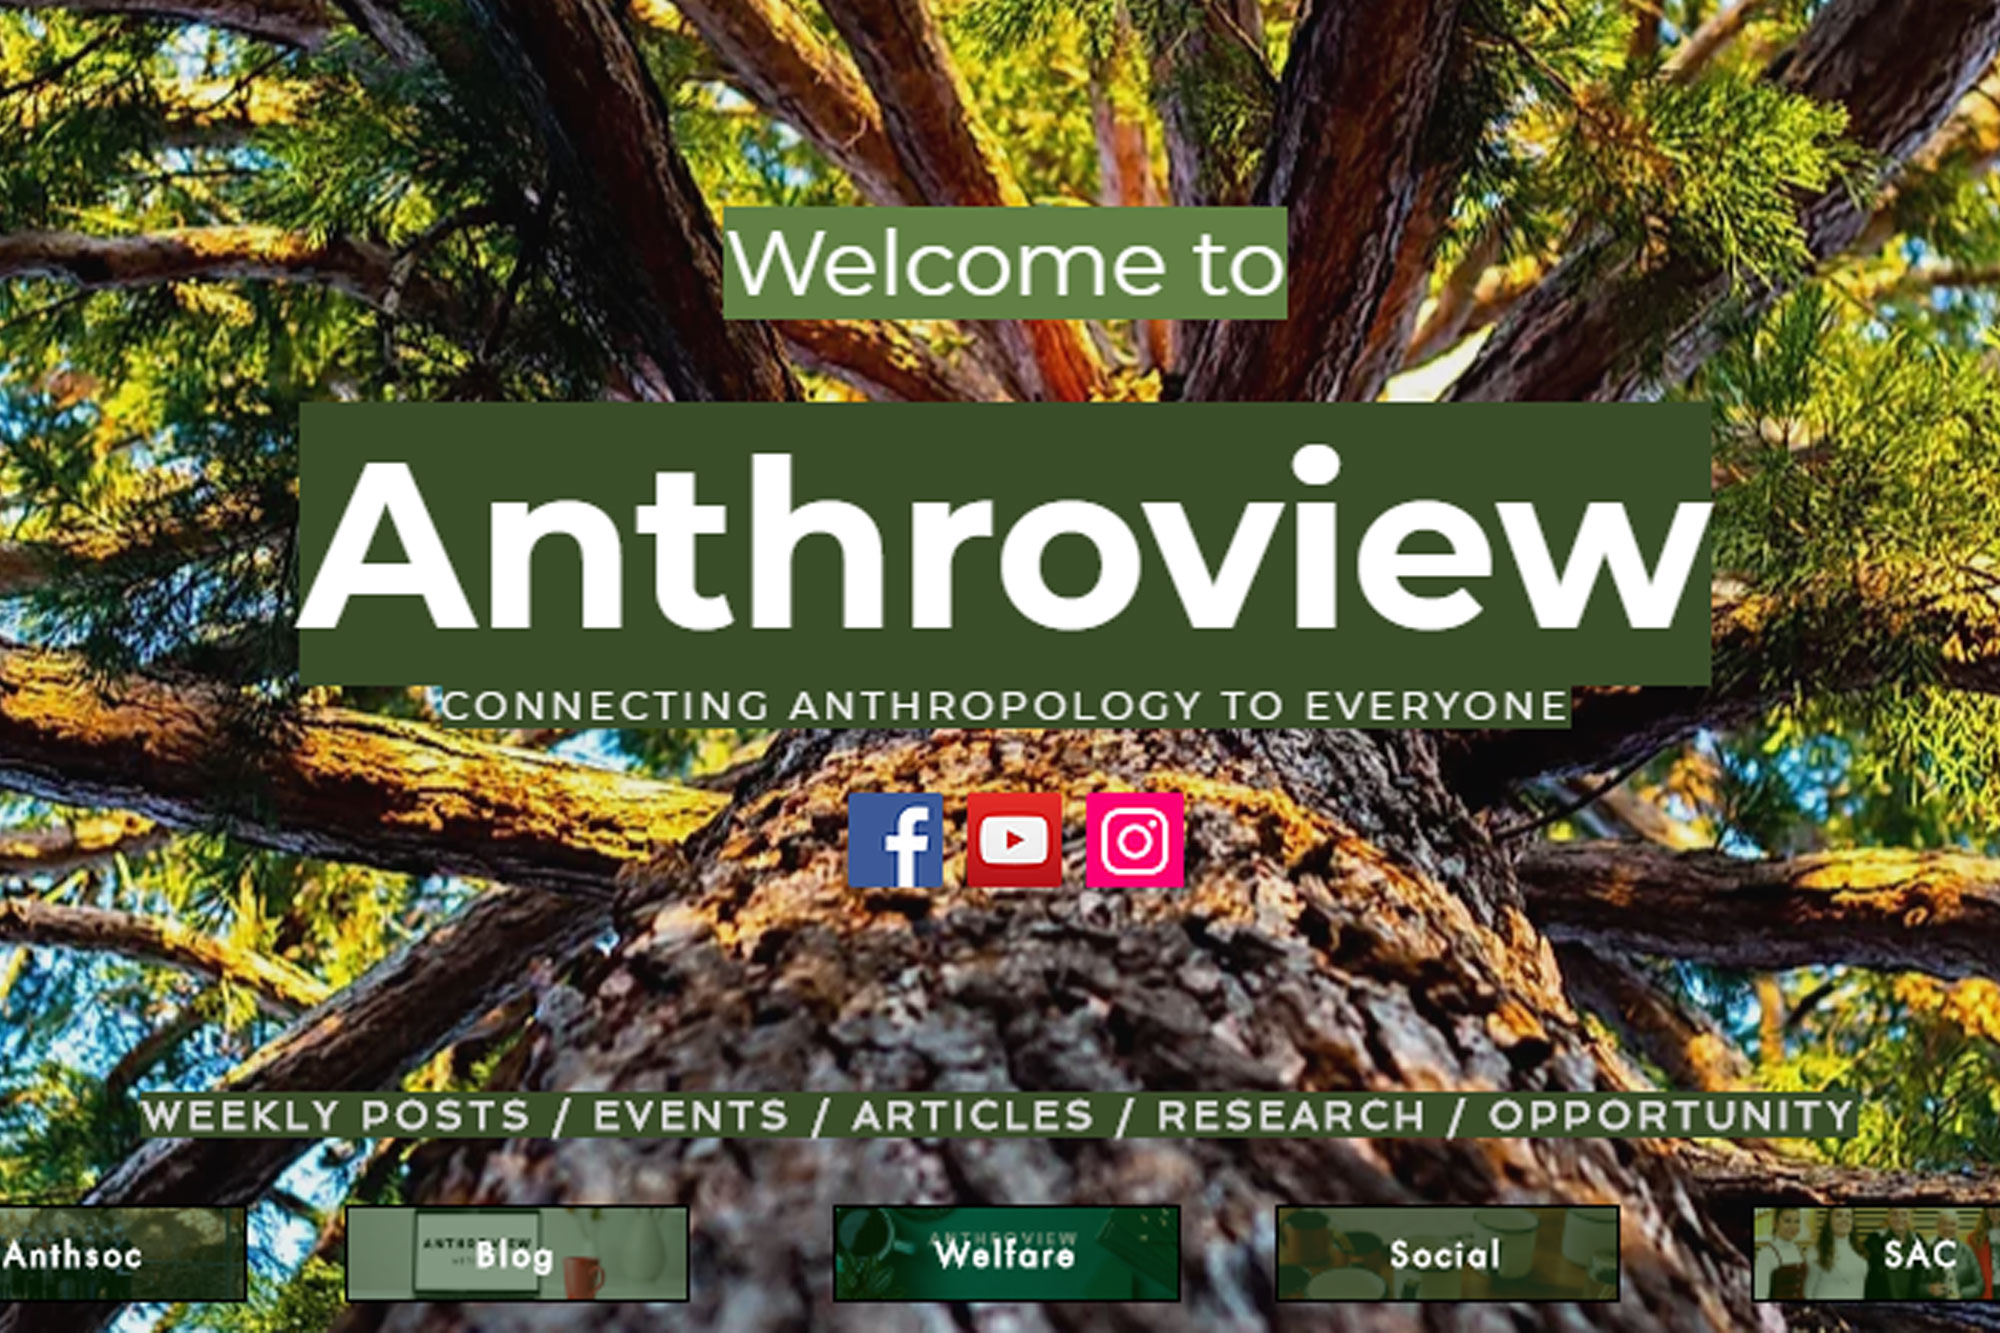 Screenshot of Anthroview homepage welcoming users to the site